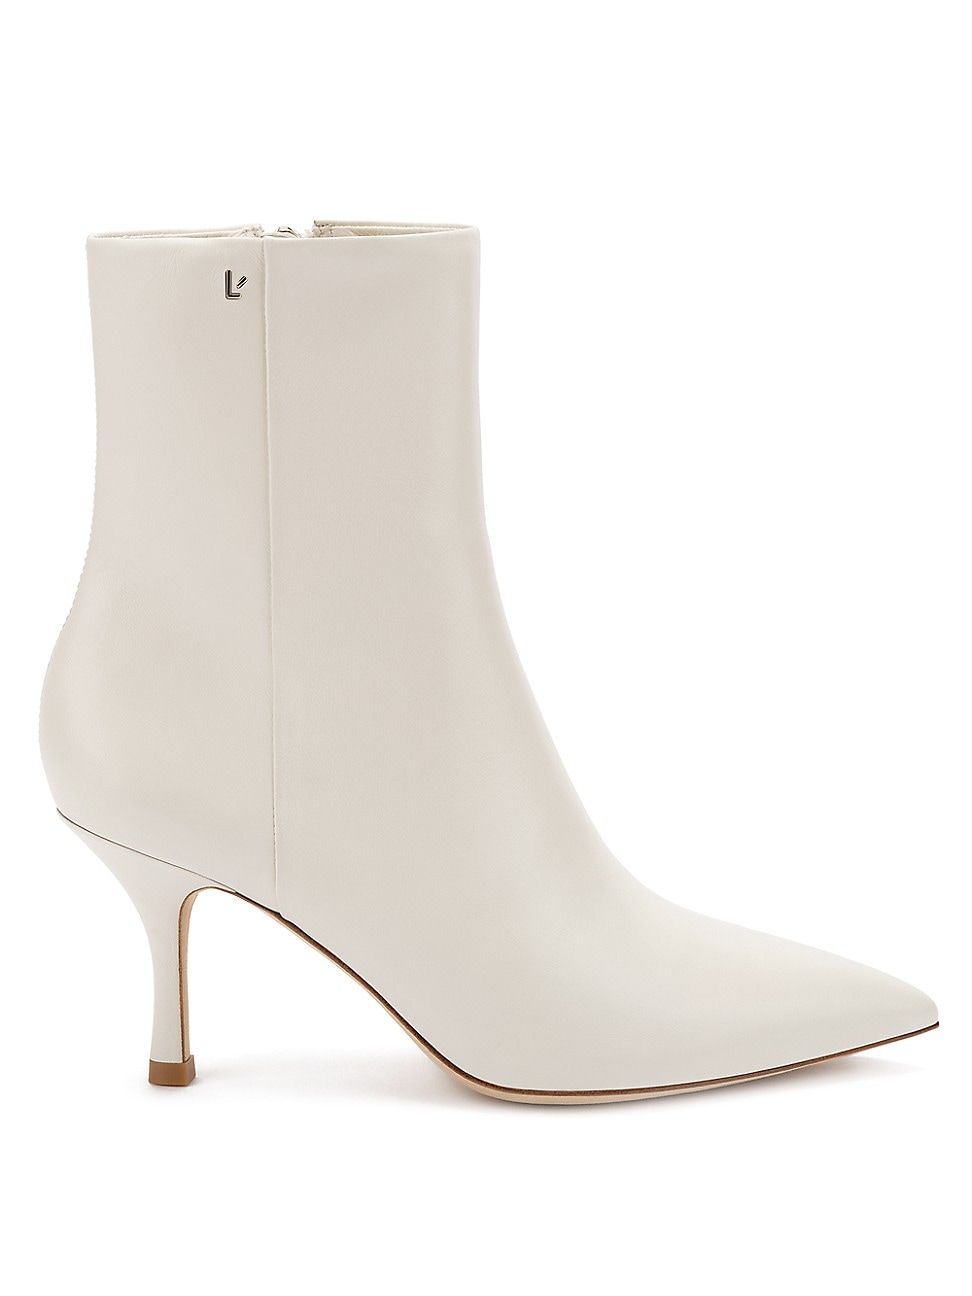 Women's Mini Kate Leather Ankle Booties - Ivory - Size 7 | Saks Fifth Avenue